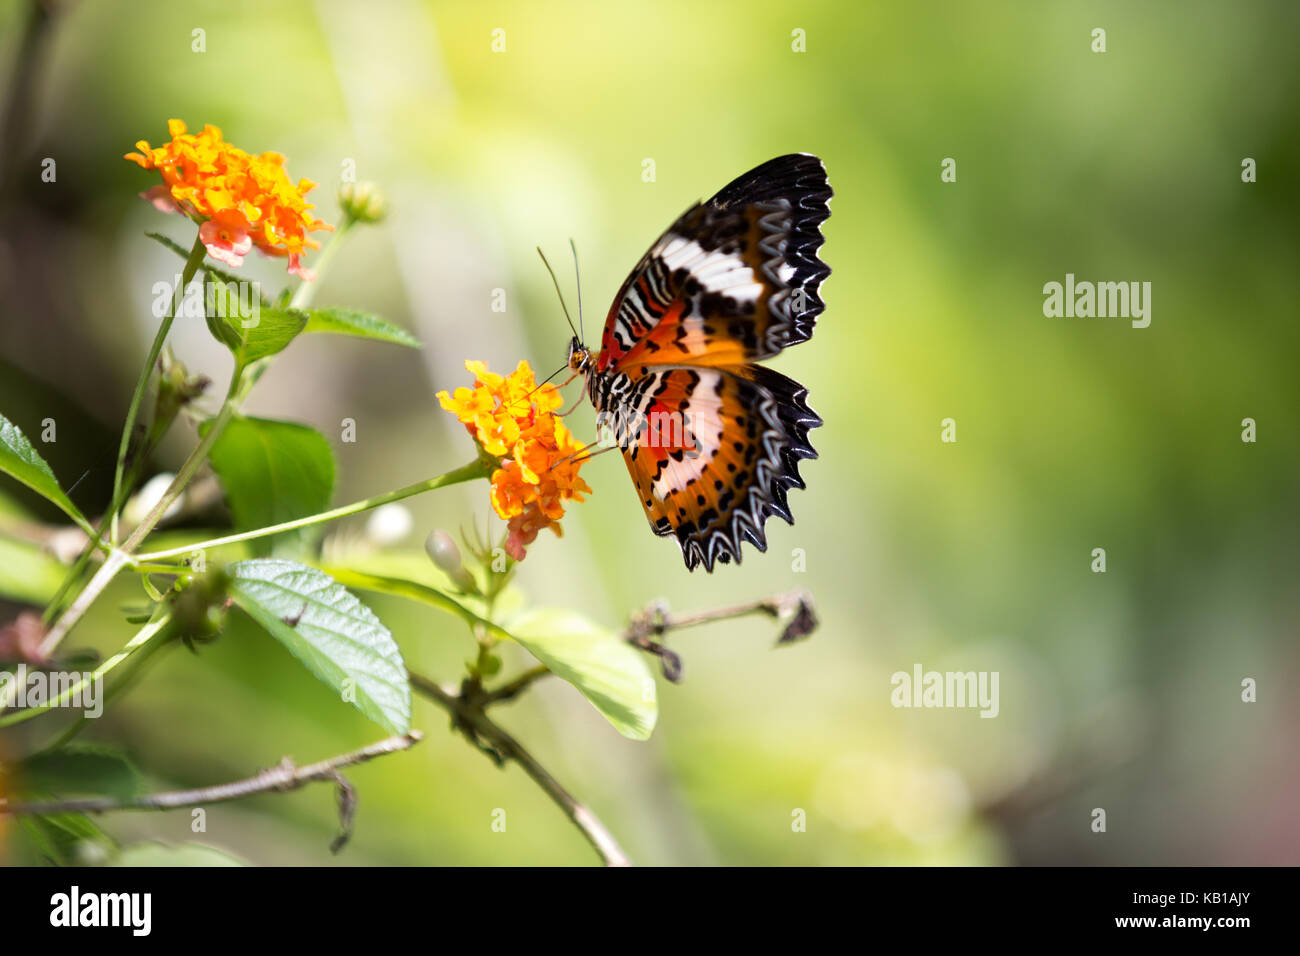 Amazing butterfly with red and black spots Stock Photo